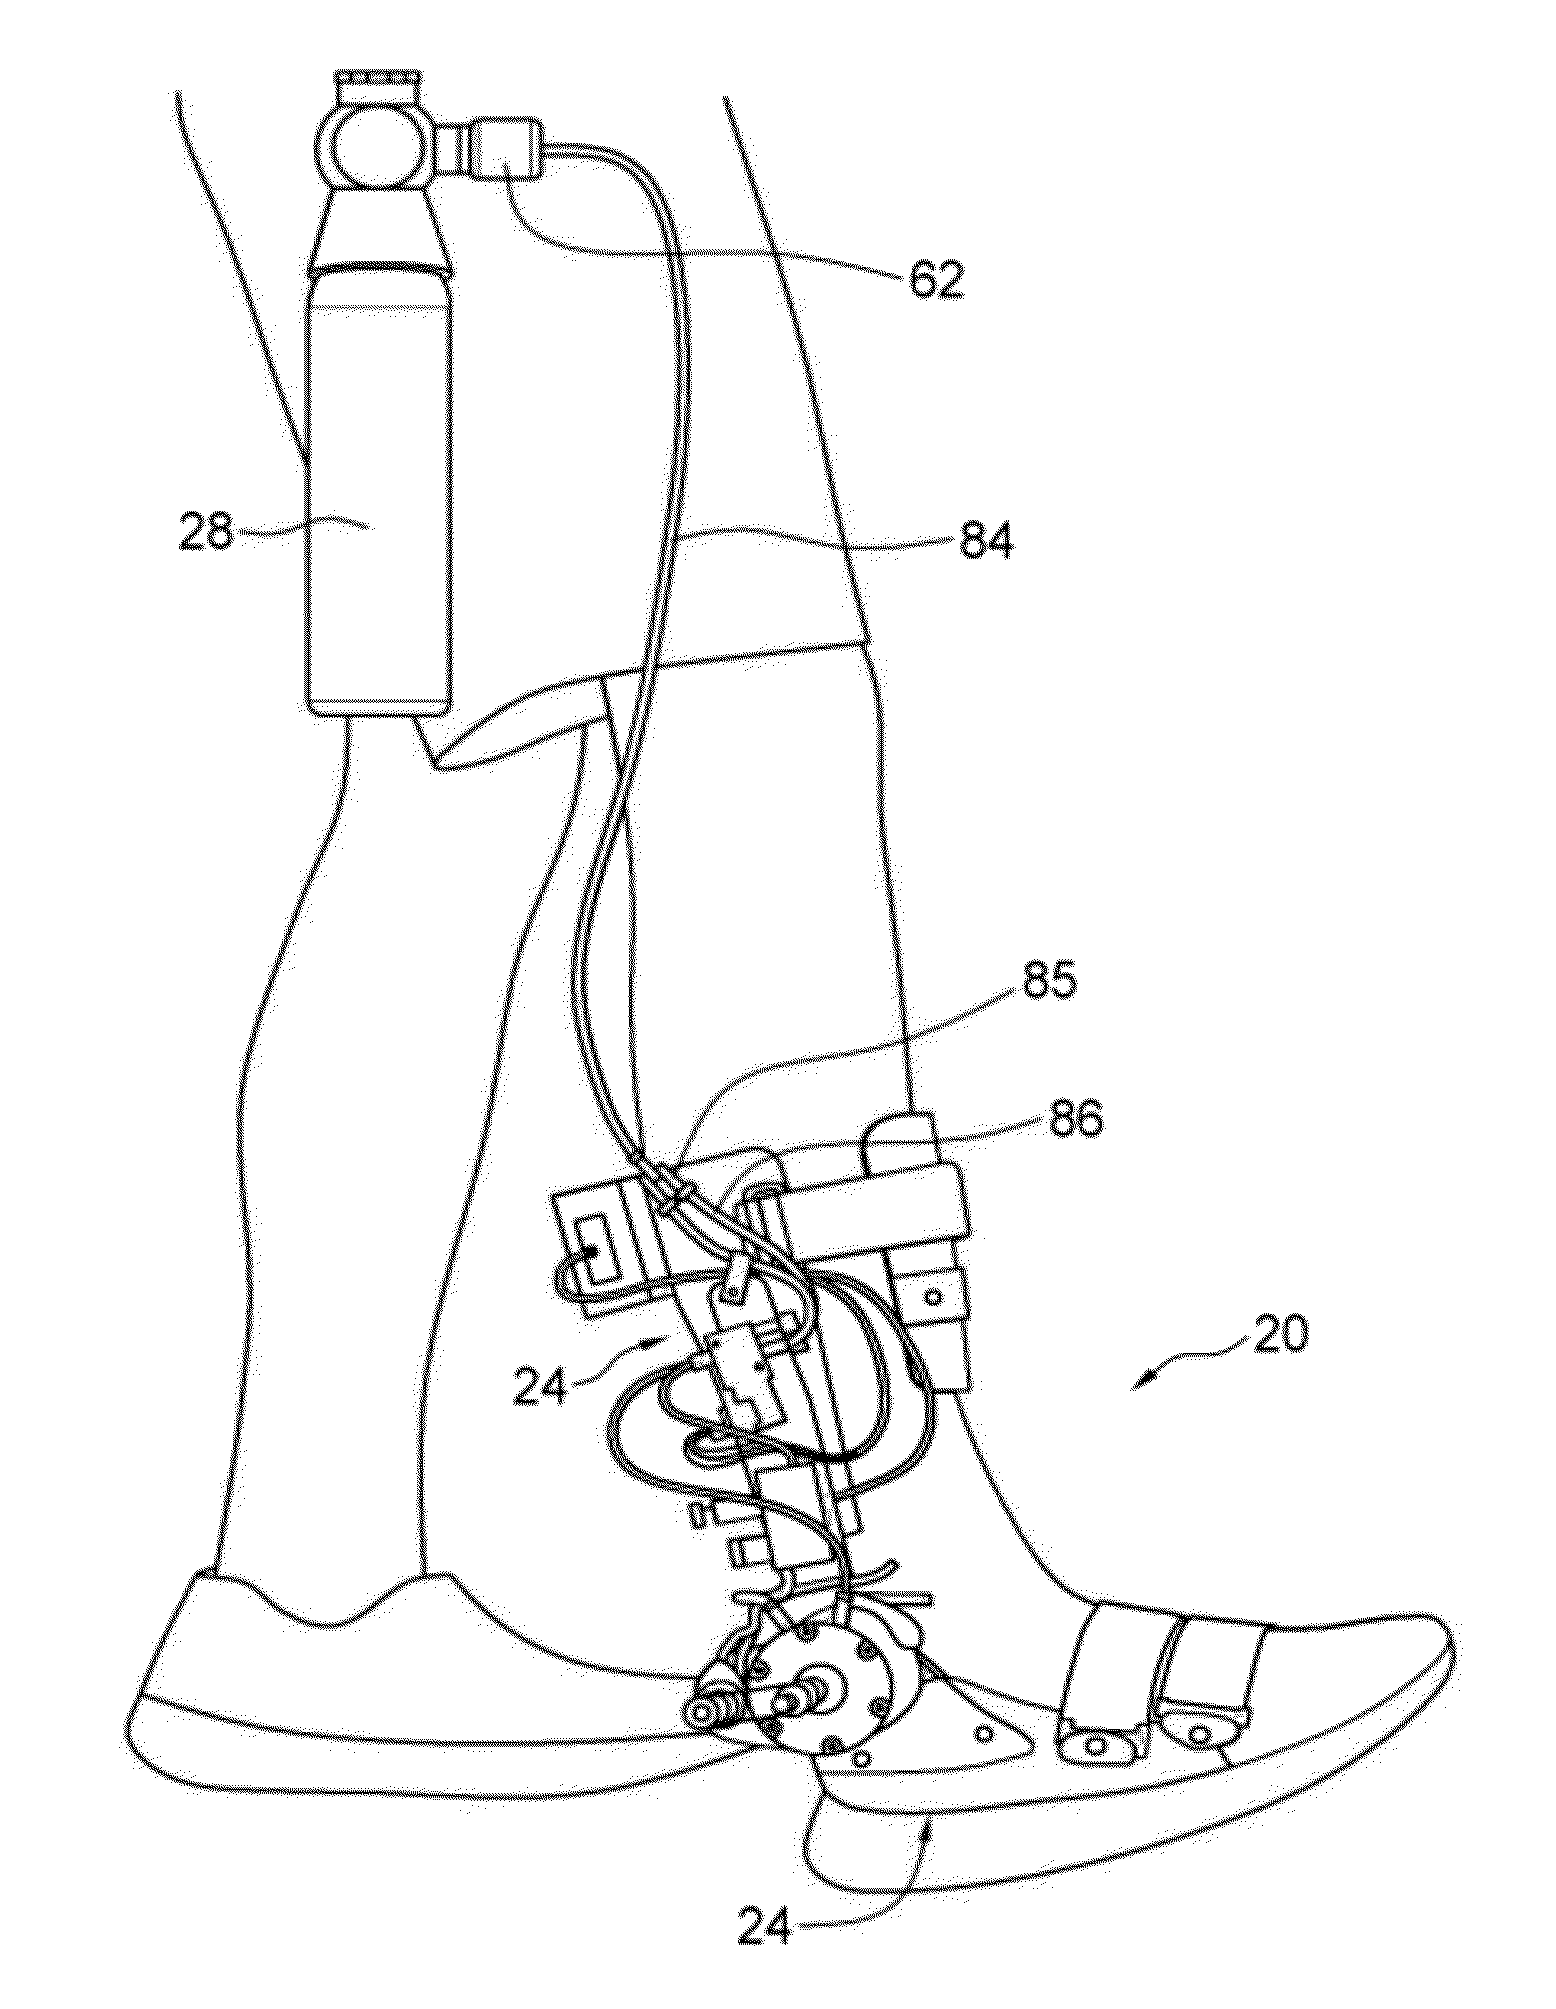 Portable active pneumatically powered ankle-foot orthosis